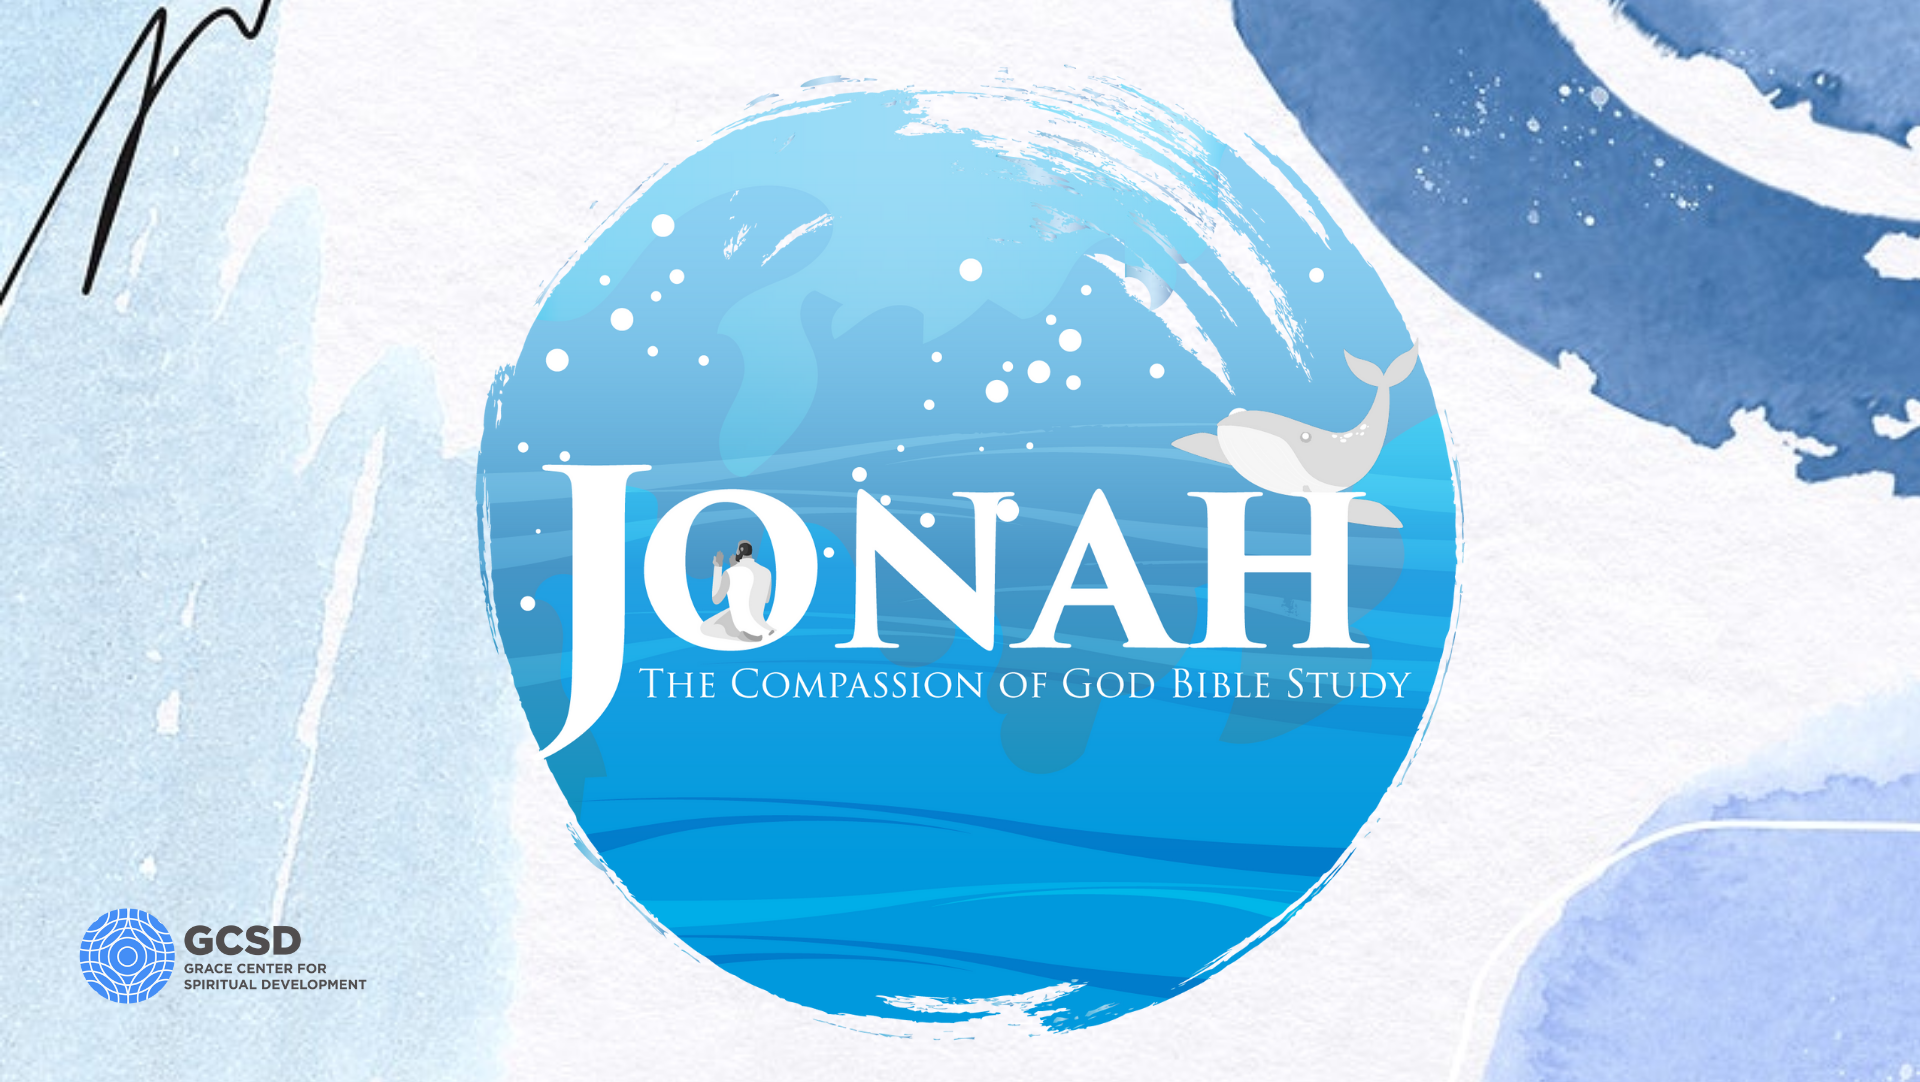 Jonah Bible Study 2021 Email and Web 1920x1082